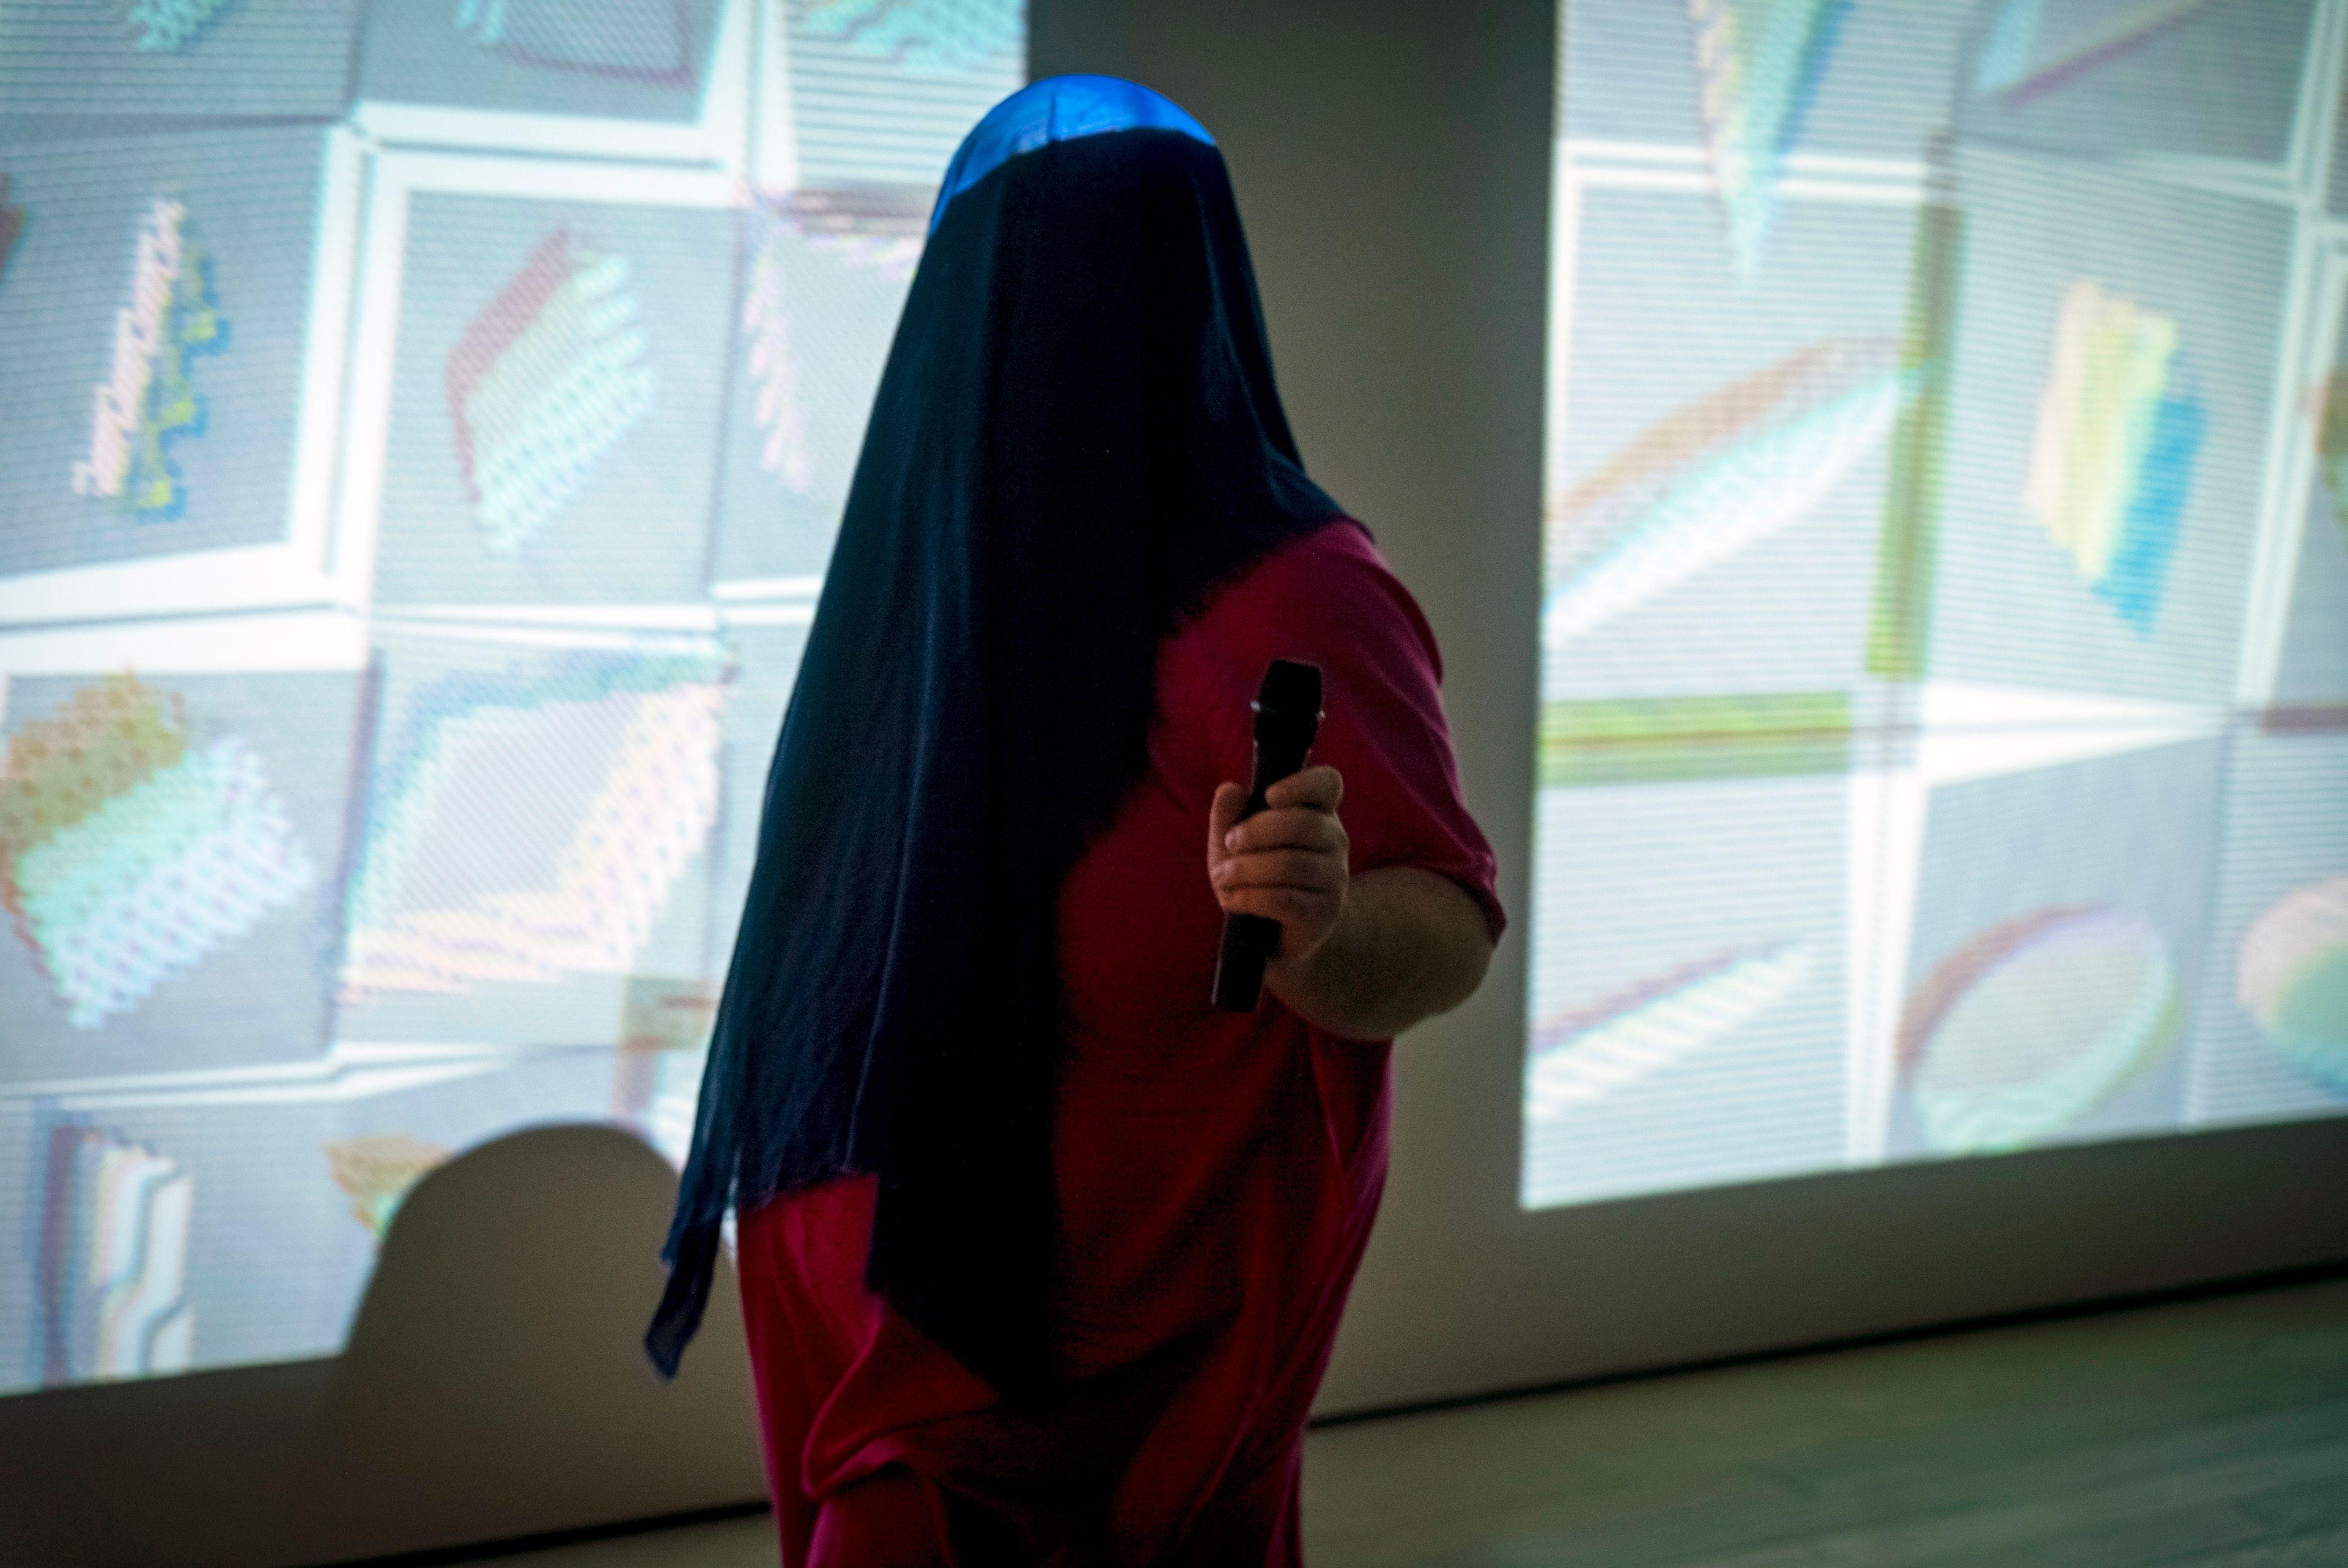 edgar in pink dress and blue head covering holds a mic and walks in front of projected graphic solids